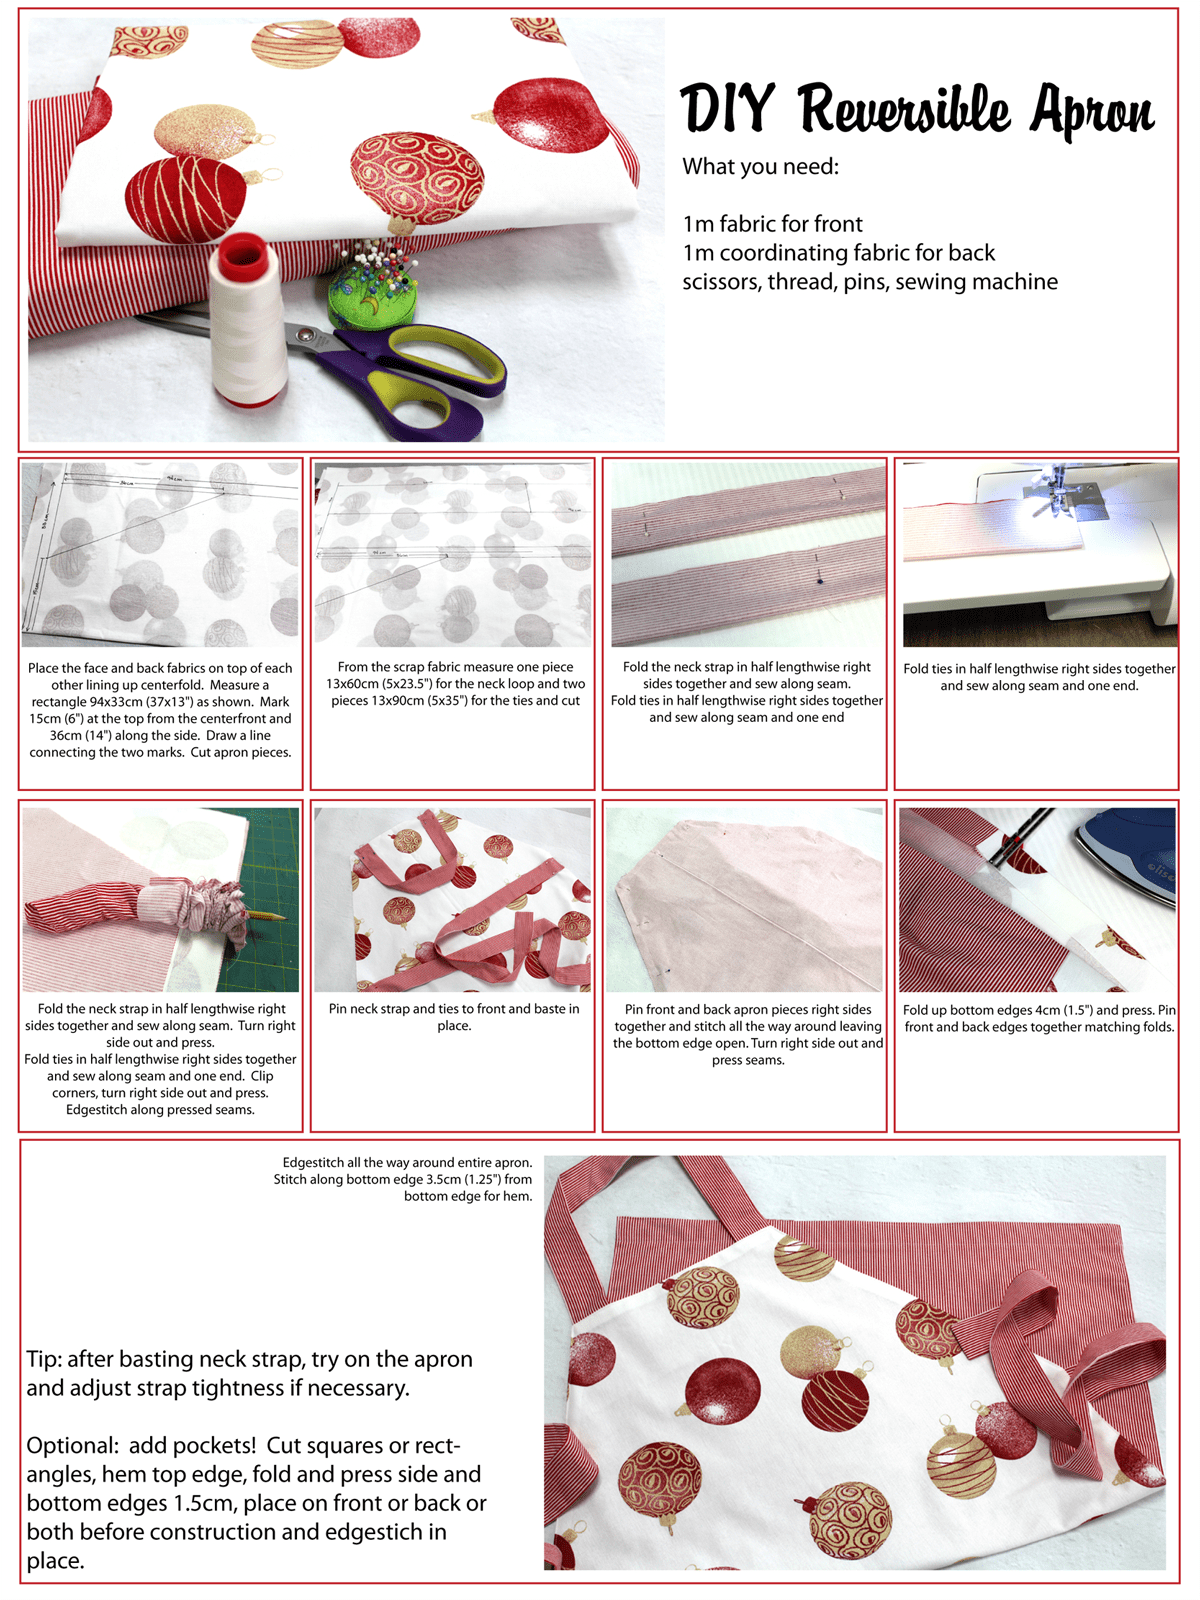 Materials & steps to create your own reversible apron 